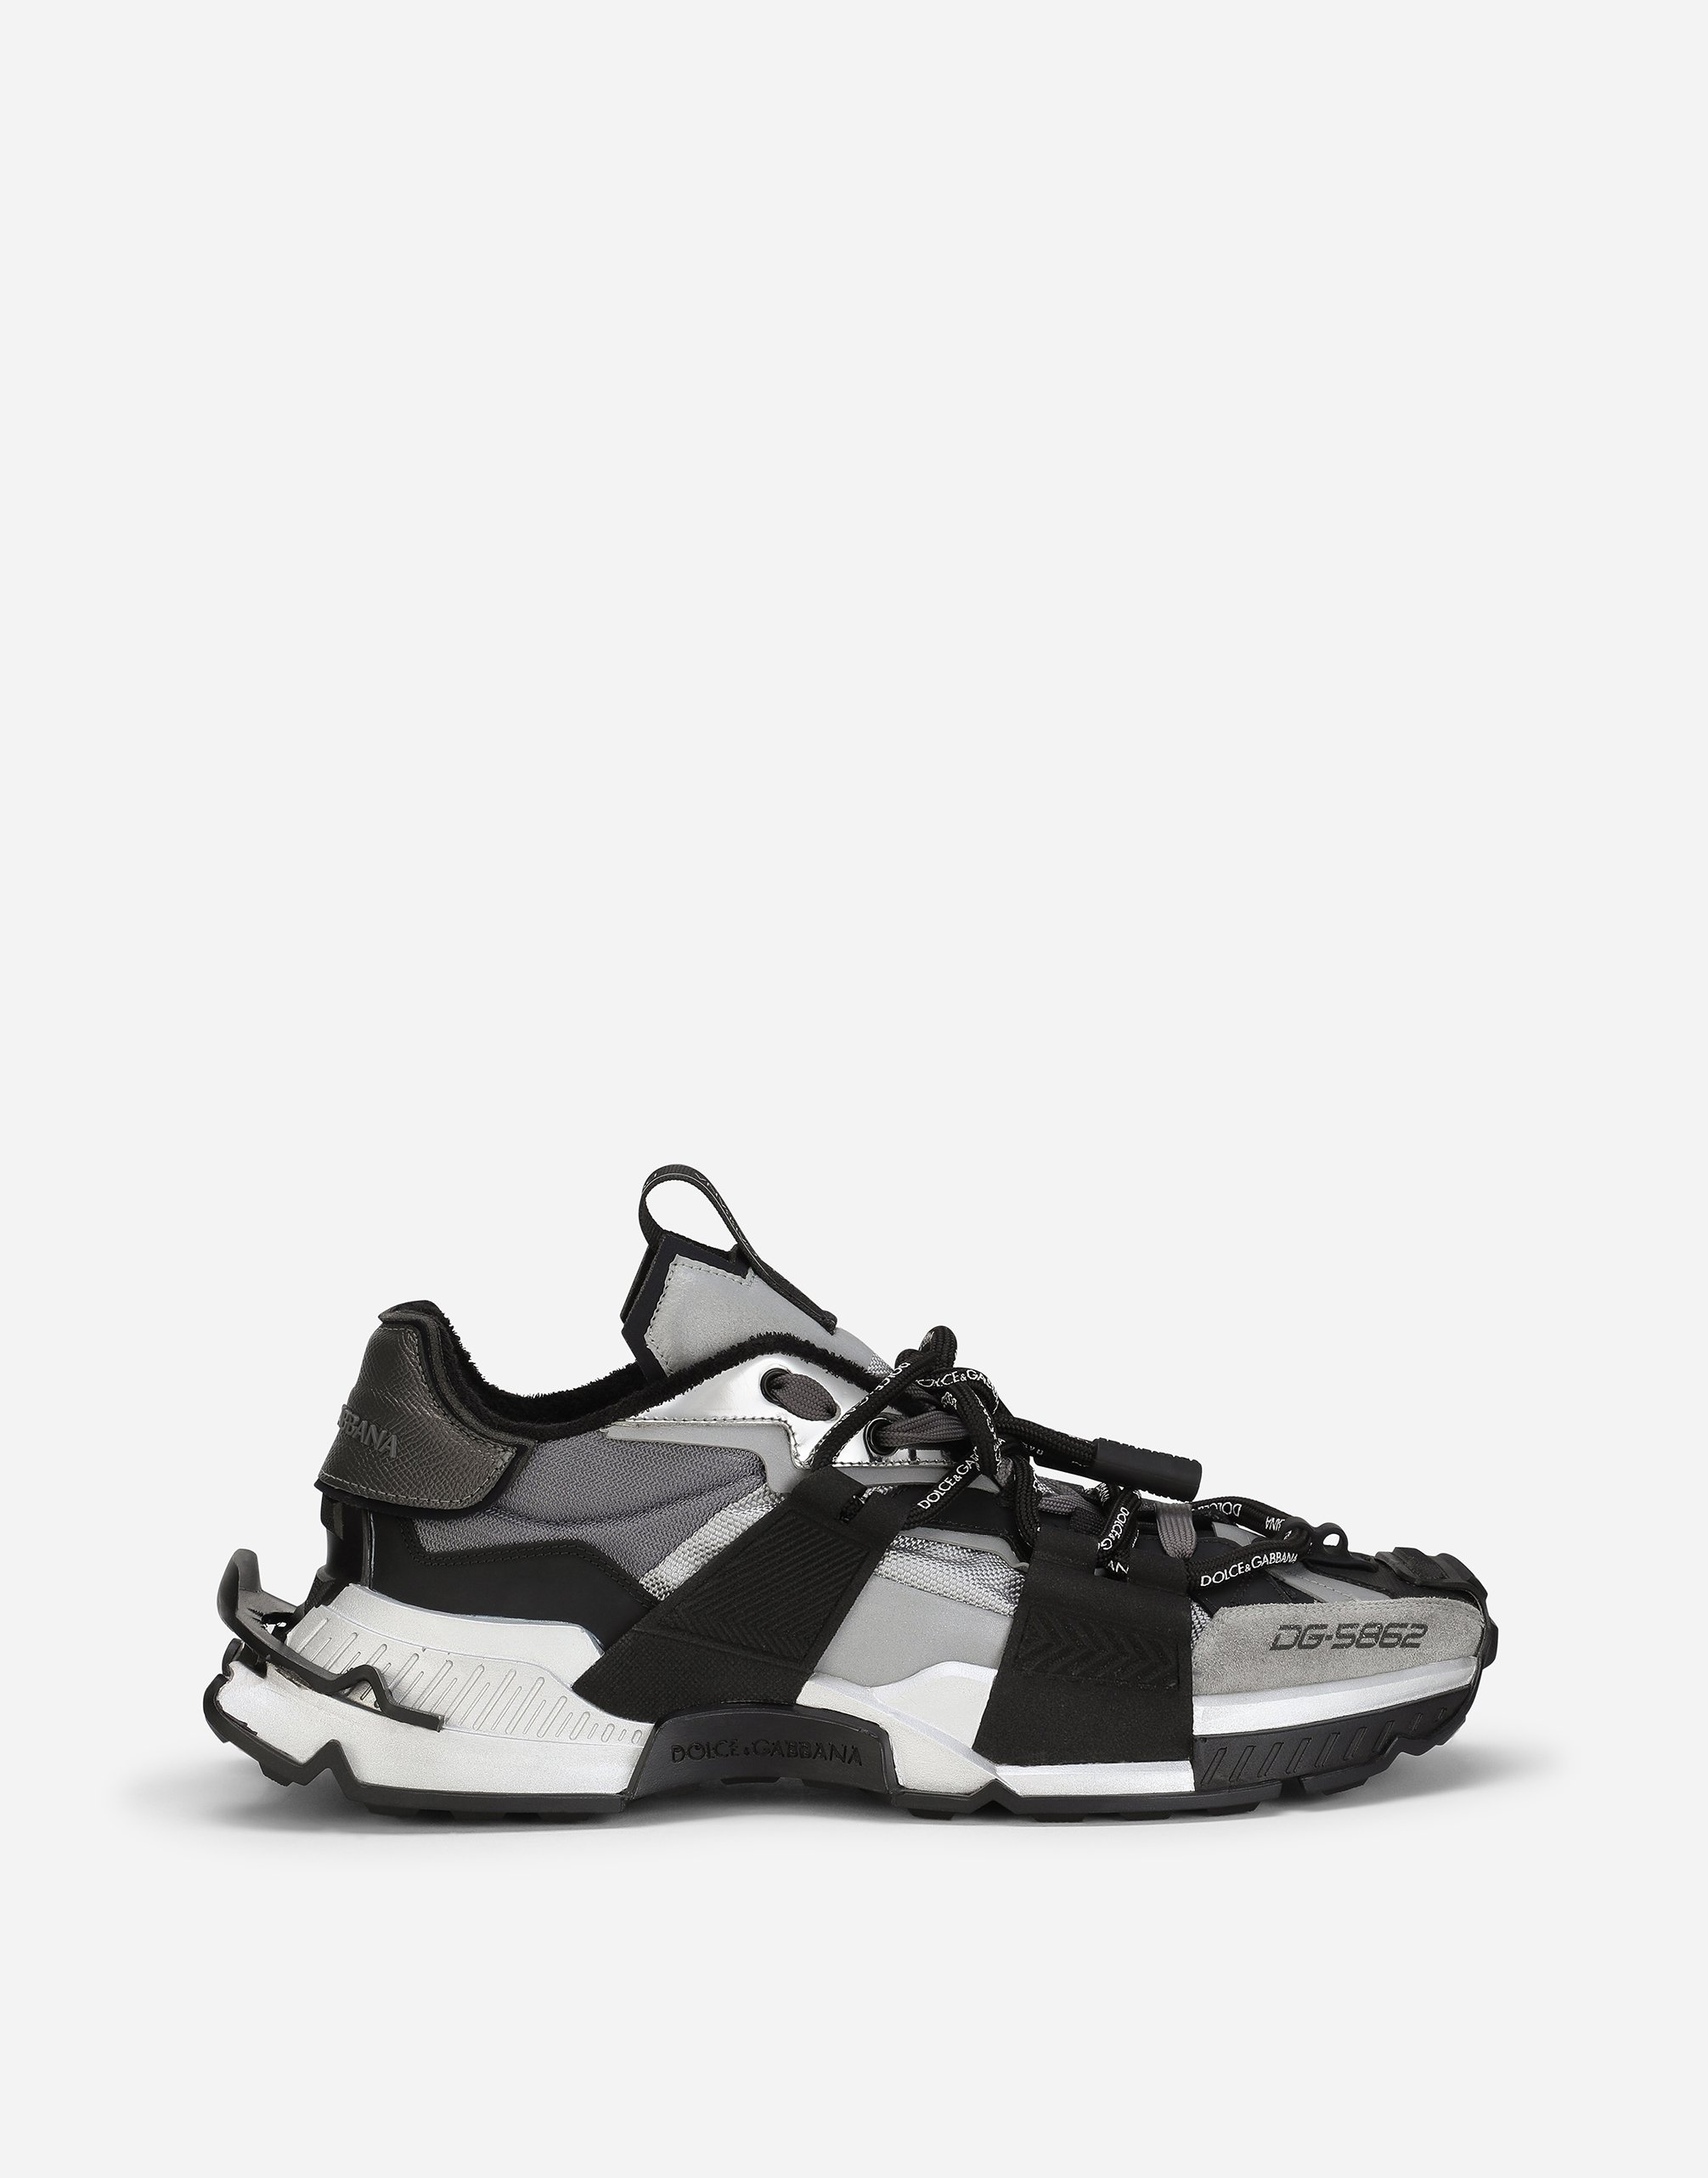 Mixed-materials Space sneakers in Black/Silver for Men | Dolce&Gabbana®